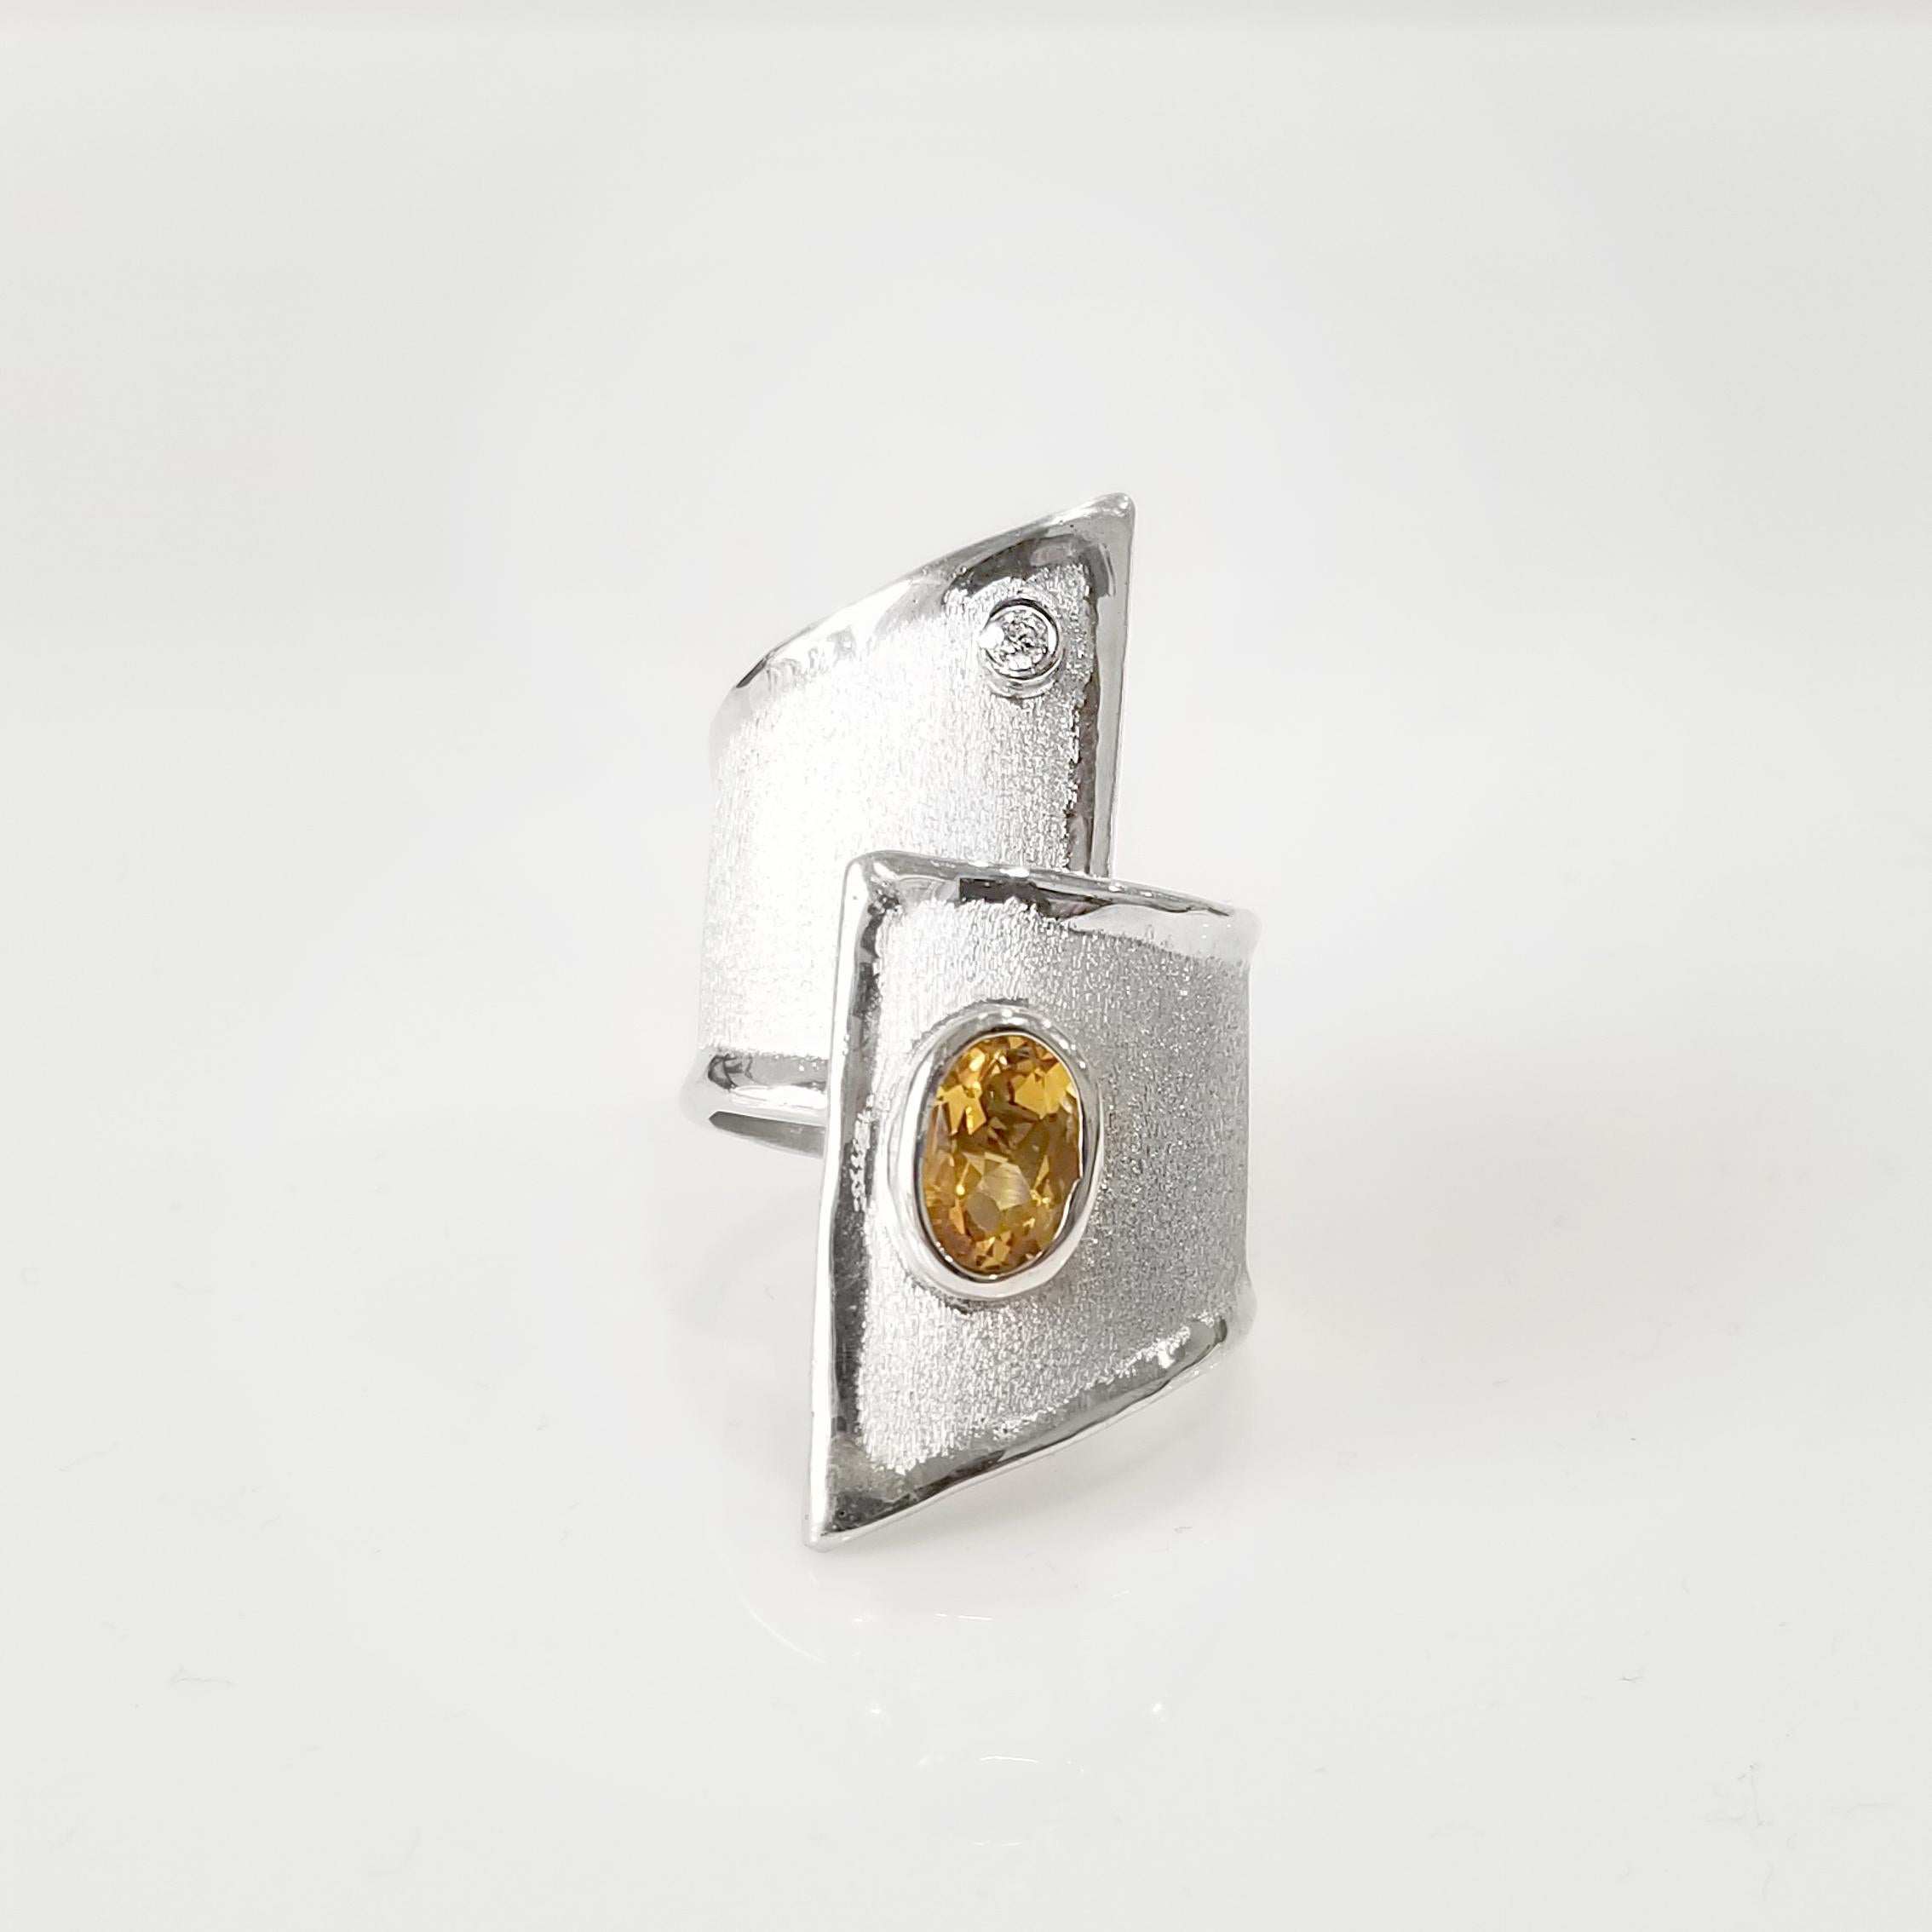 You are admiring the handmade artisan ring Yianni Creations from Ammos Collection all crafted from Fine Silver 950 purity and plated with palladium to protect it from the elements. This adjustable ring is featuring 1.25 Carat oval cut citrine